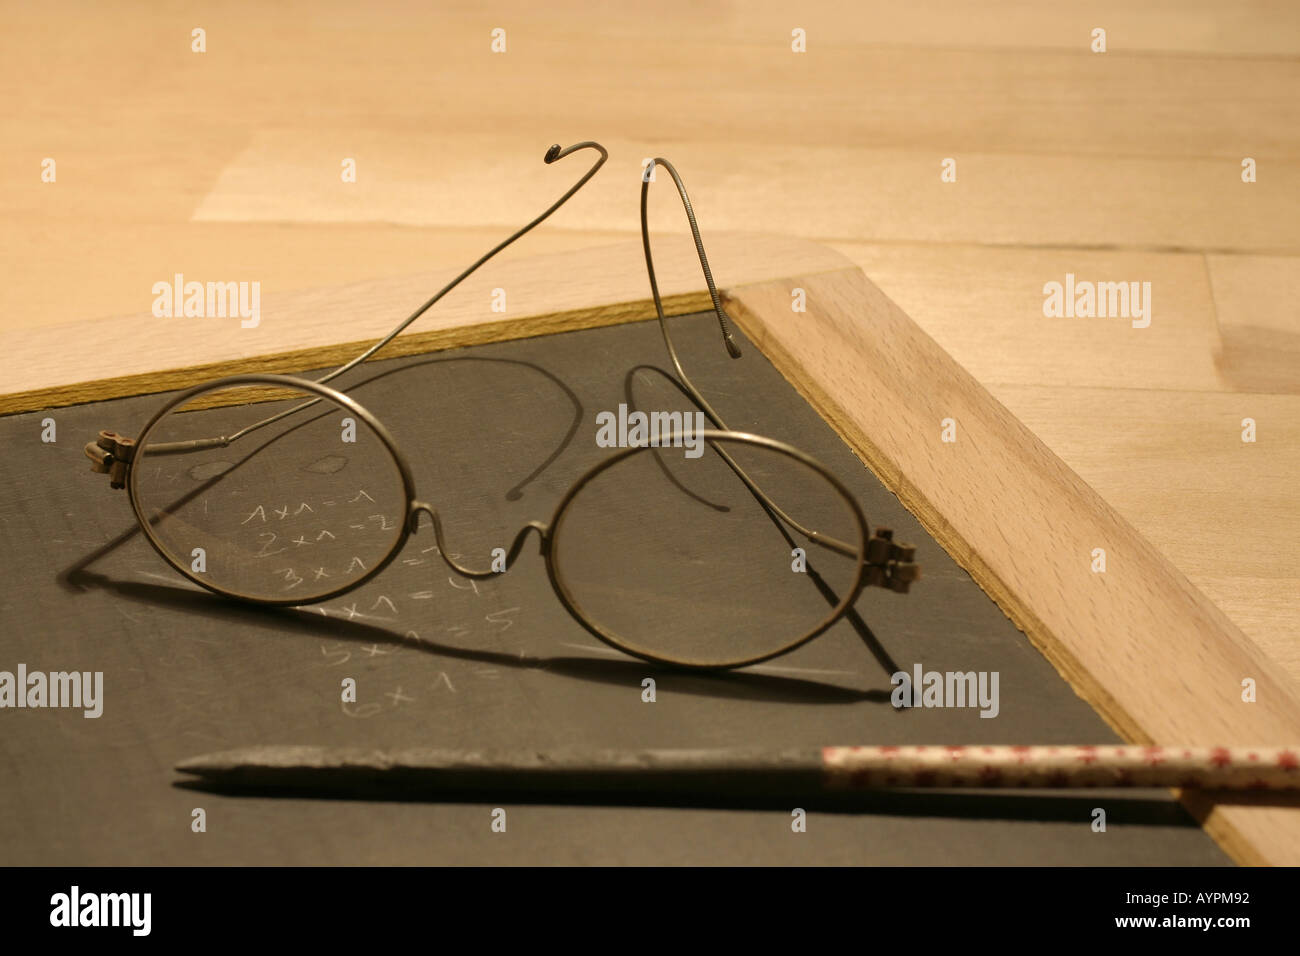 Circular framed spectacles kept on a slate beside a long pencil Stock Photo